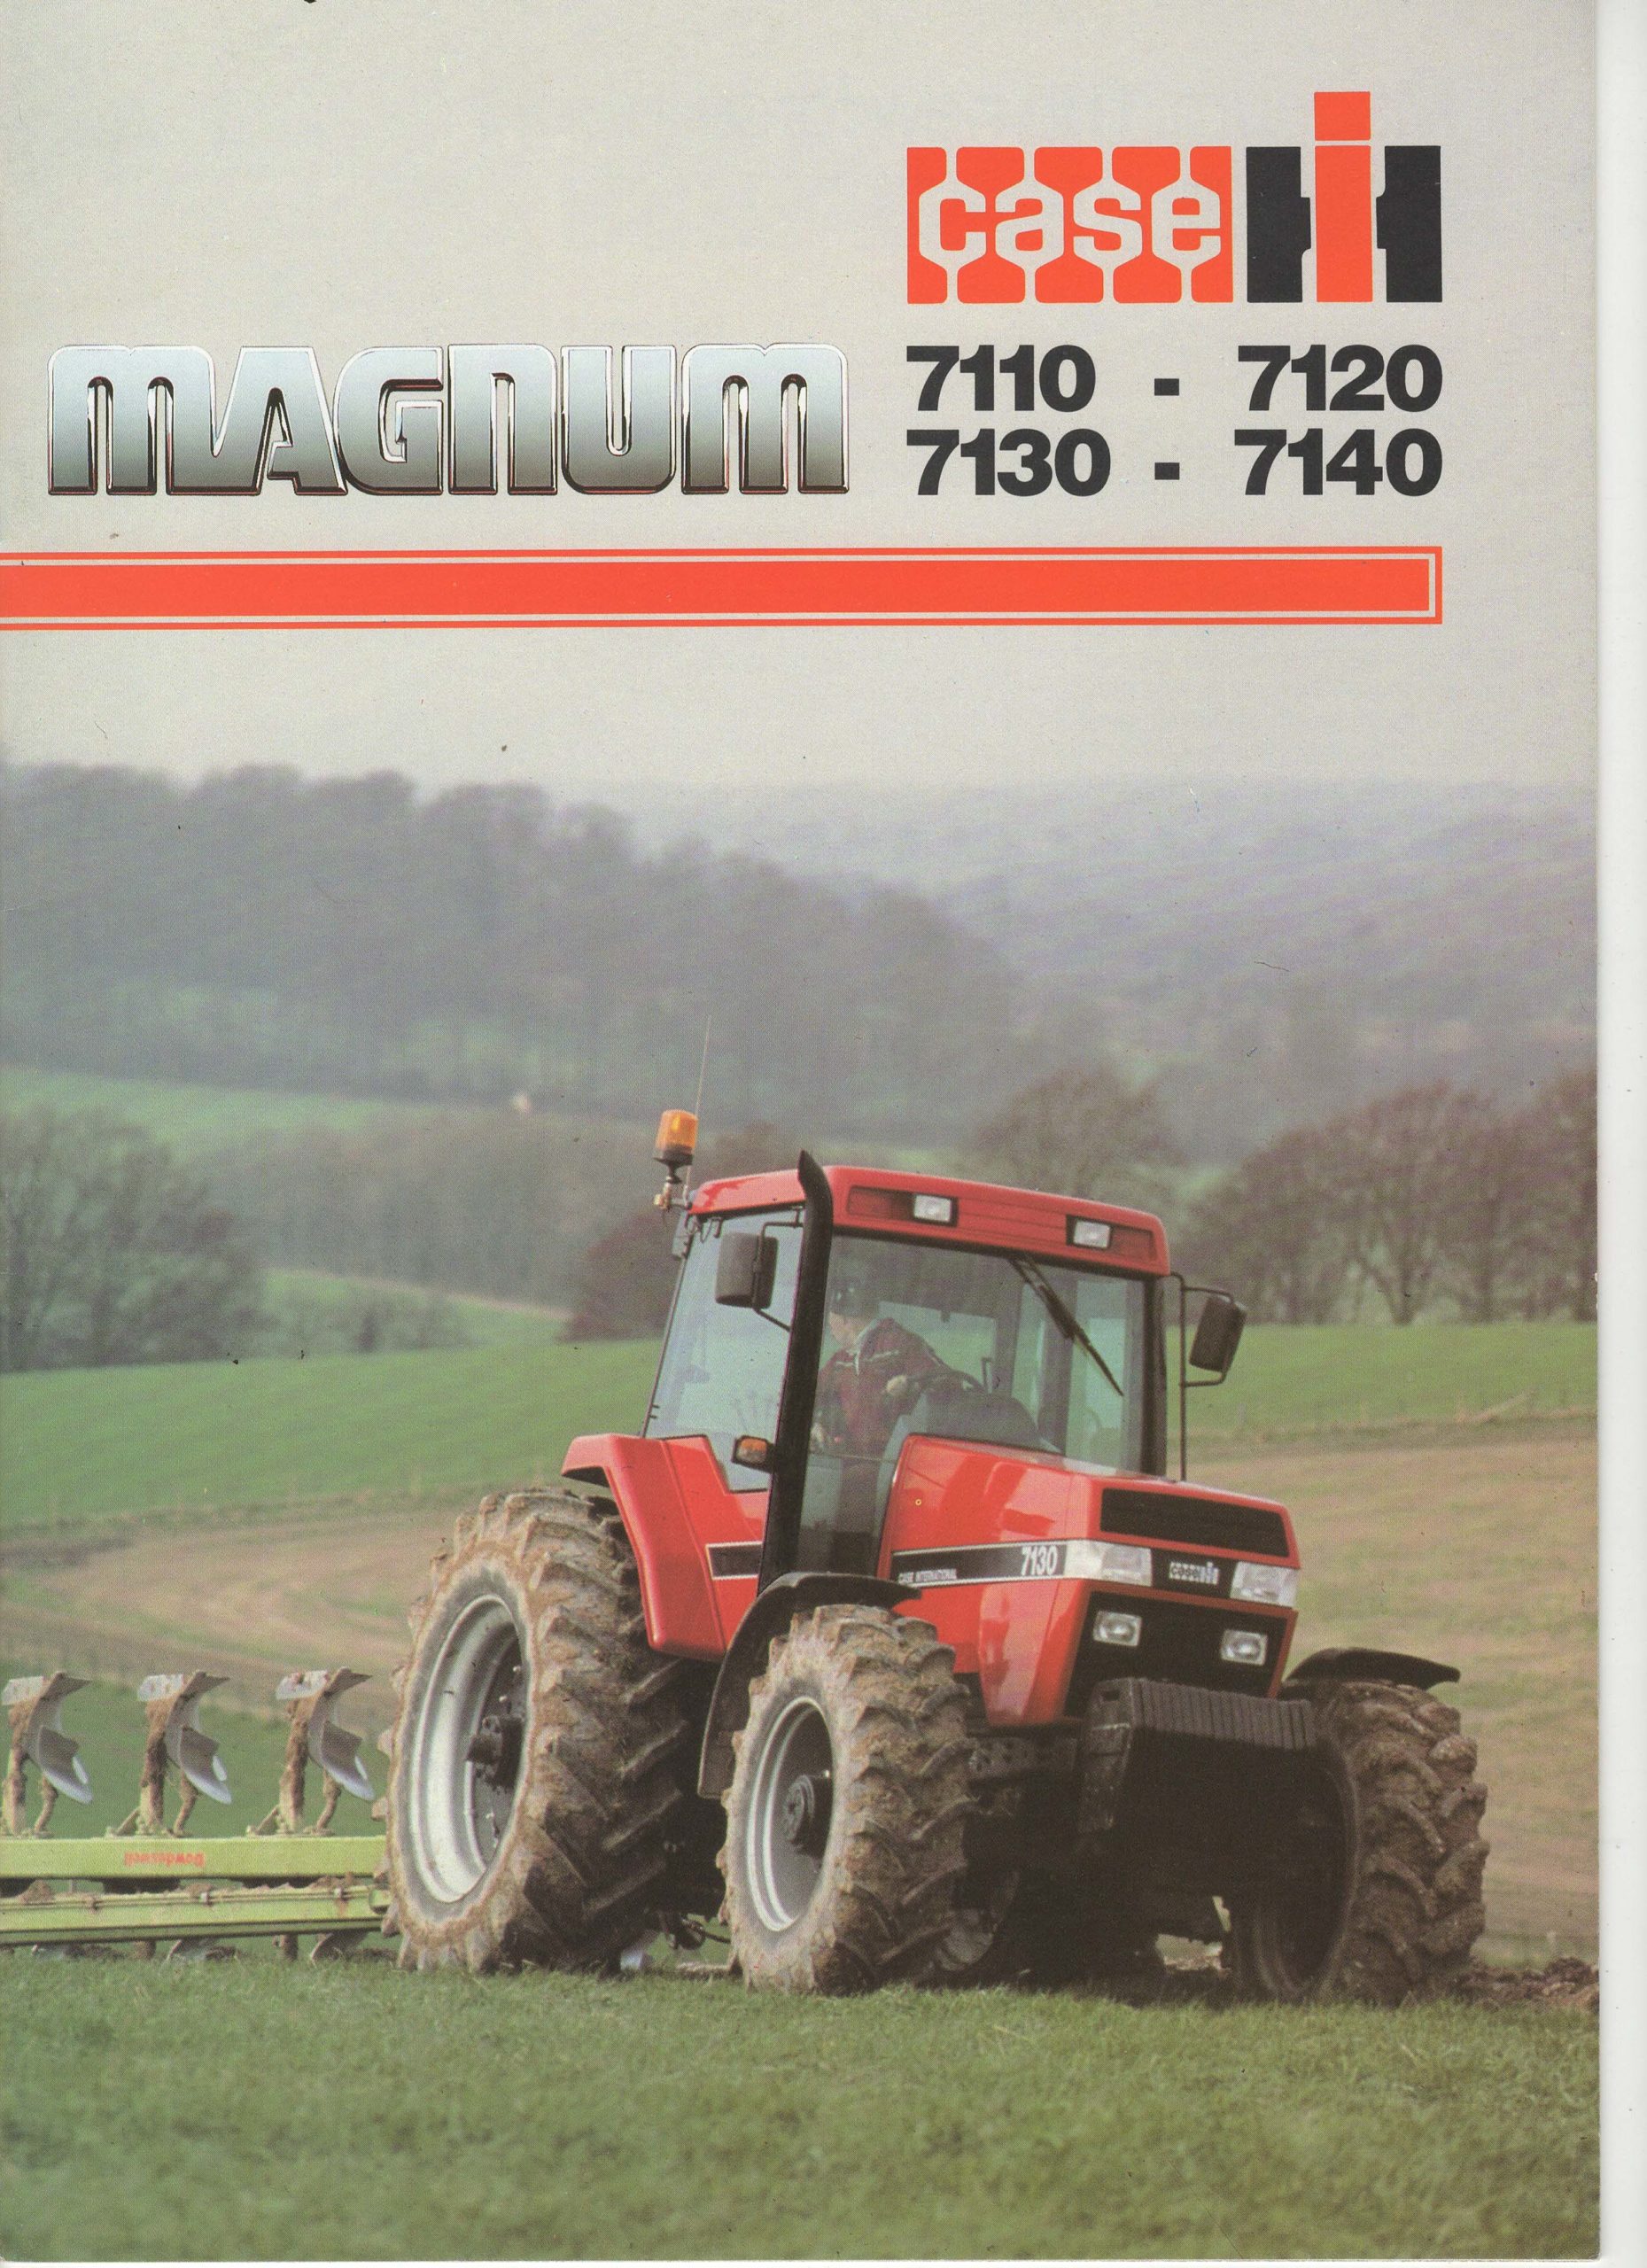 Case International 7100 Magnum Series In The Field Brochure Poster Advert A3 